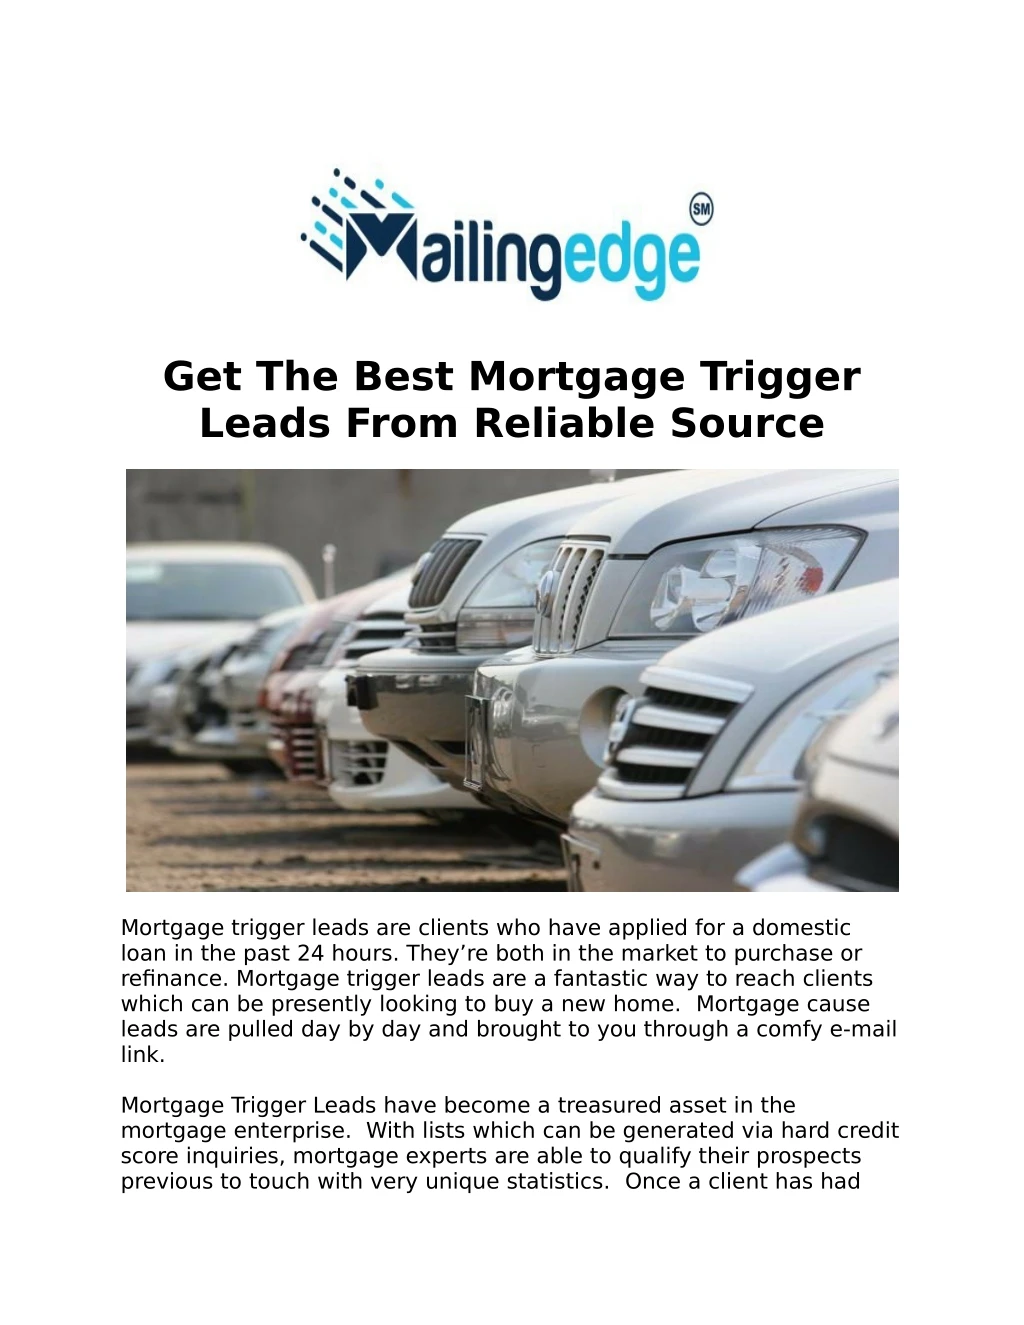 get the best mortgage trigger leads from reliable